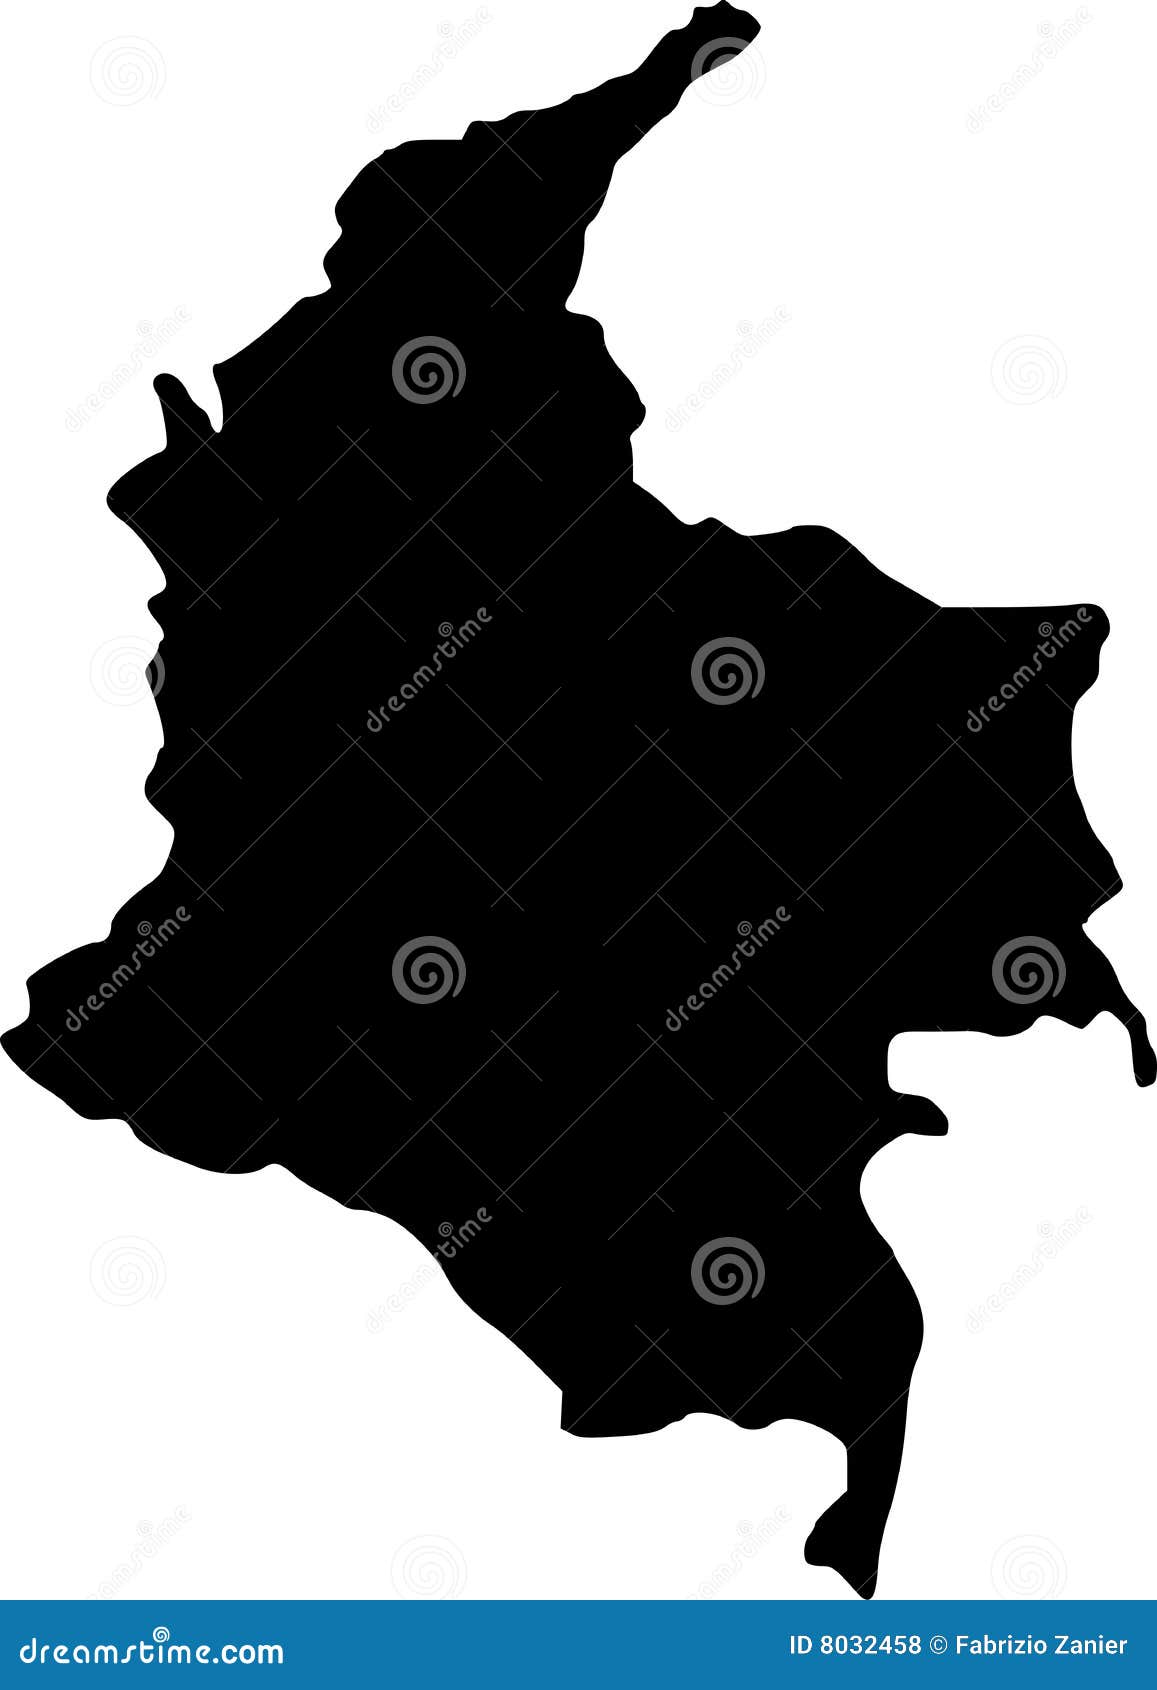 Vector Map Of Colombia Royalty Free Stock Photos Image 8032458